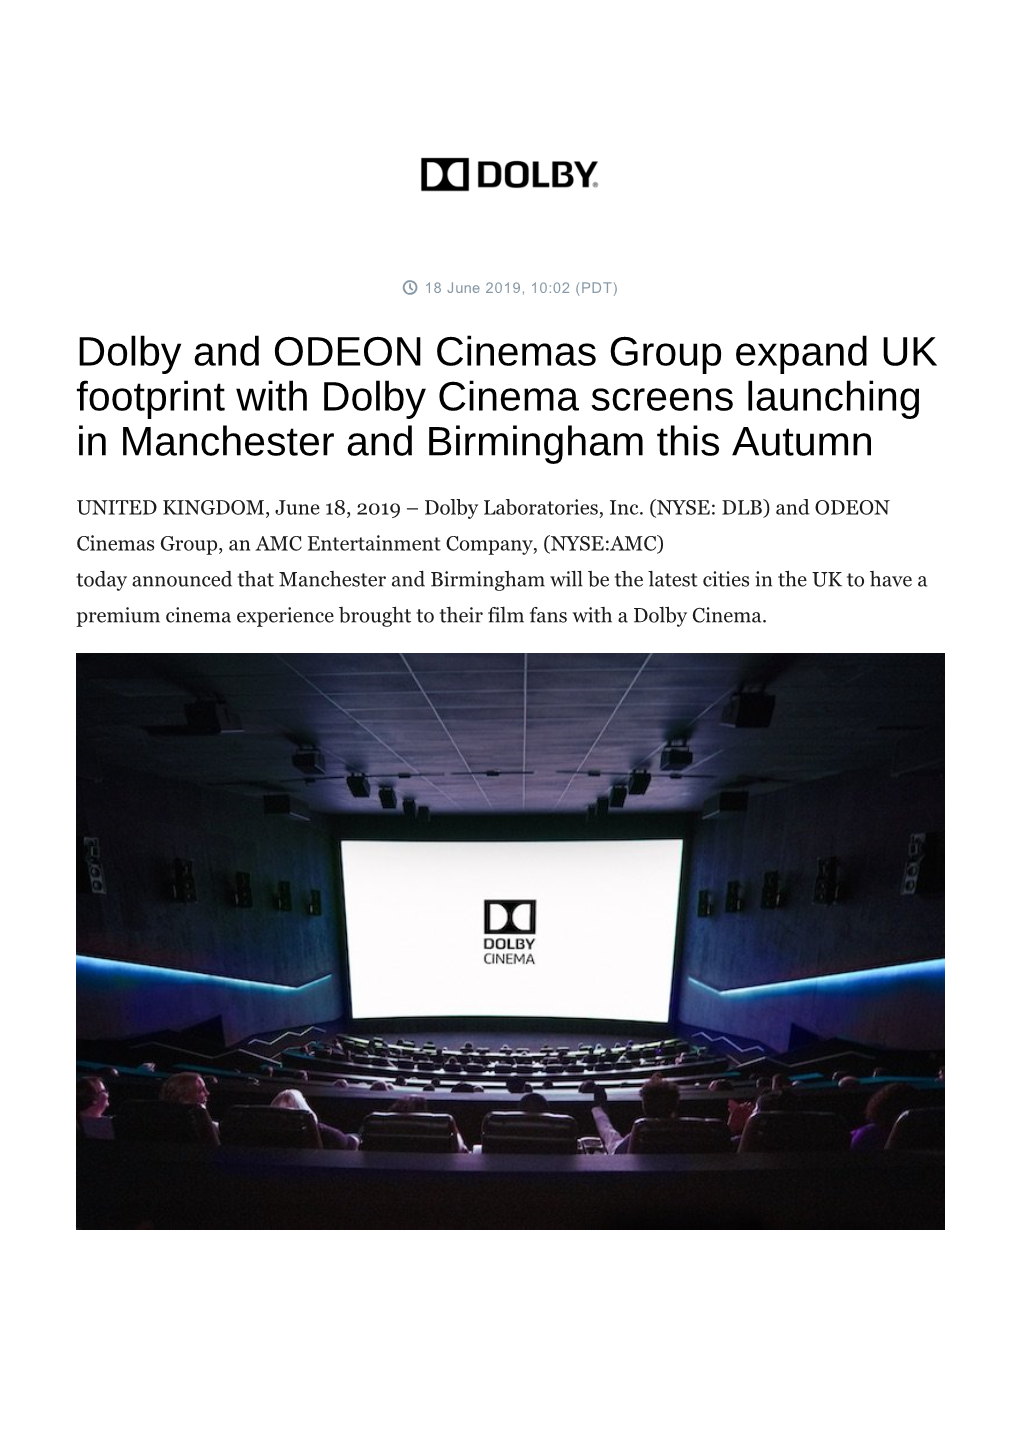 Dolby and ODEON Cinemas Group Expand UK Footprint with Dolby Cinema Screens Launching in Manchester and Birmingham This Autumn